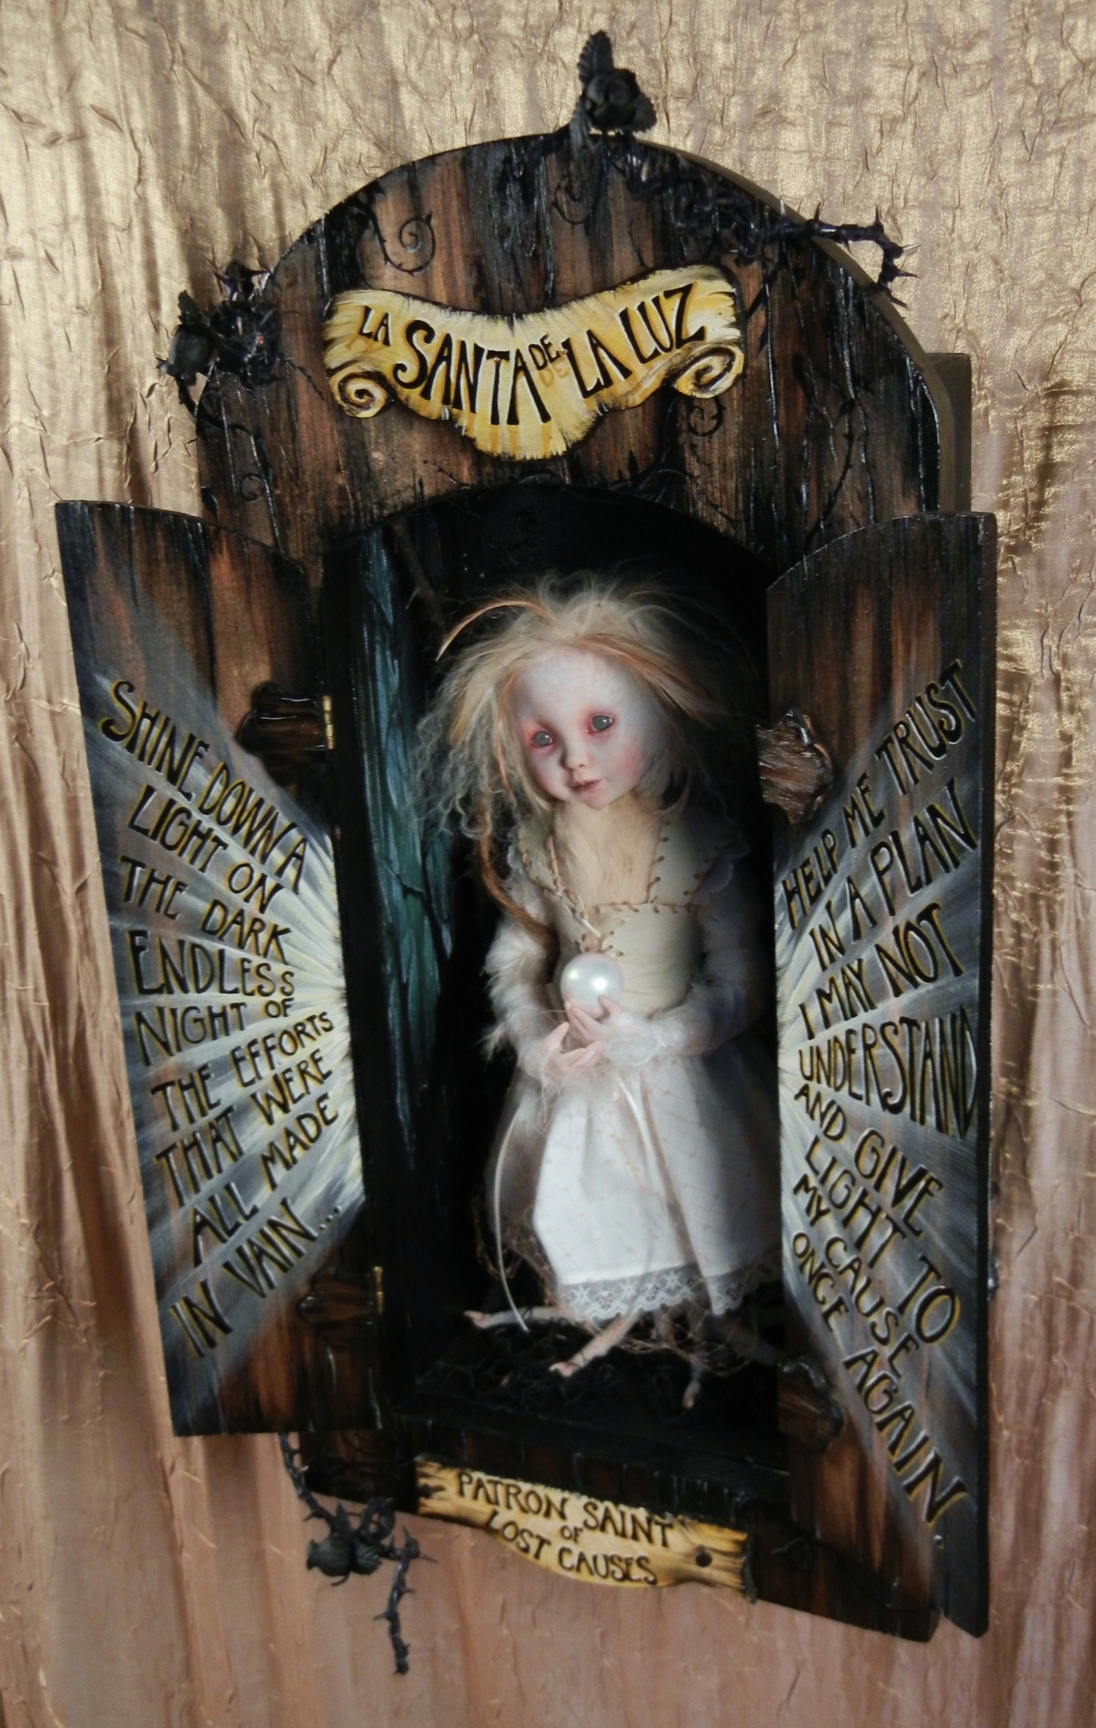 open mixed media cabinet reveals taxidermy artdoll assemblage blonde wild doll in white dress with bird feet holding pearl